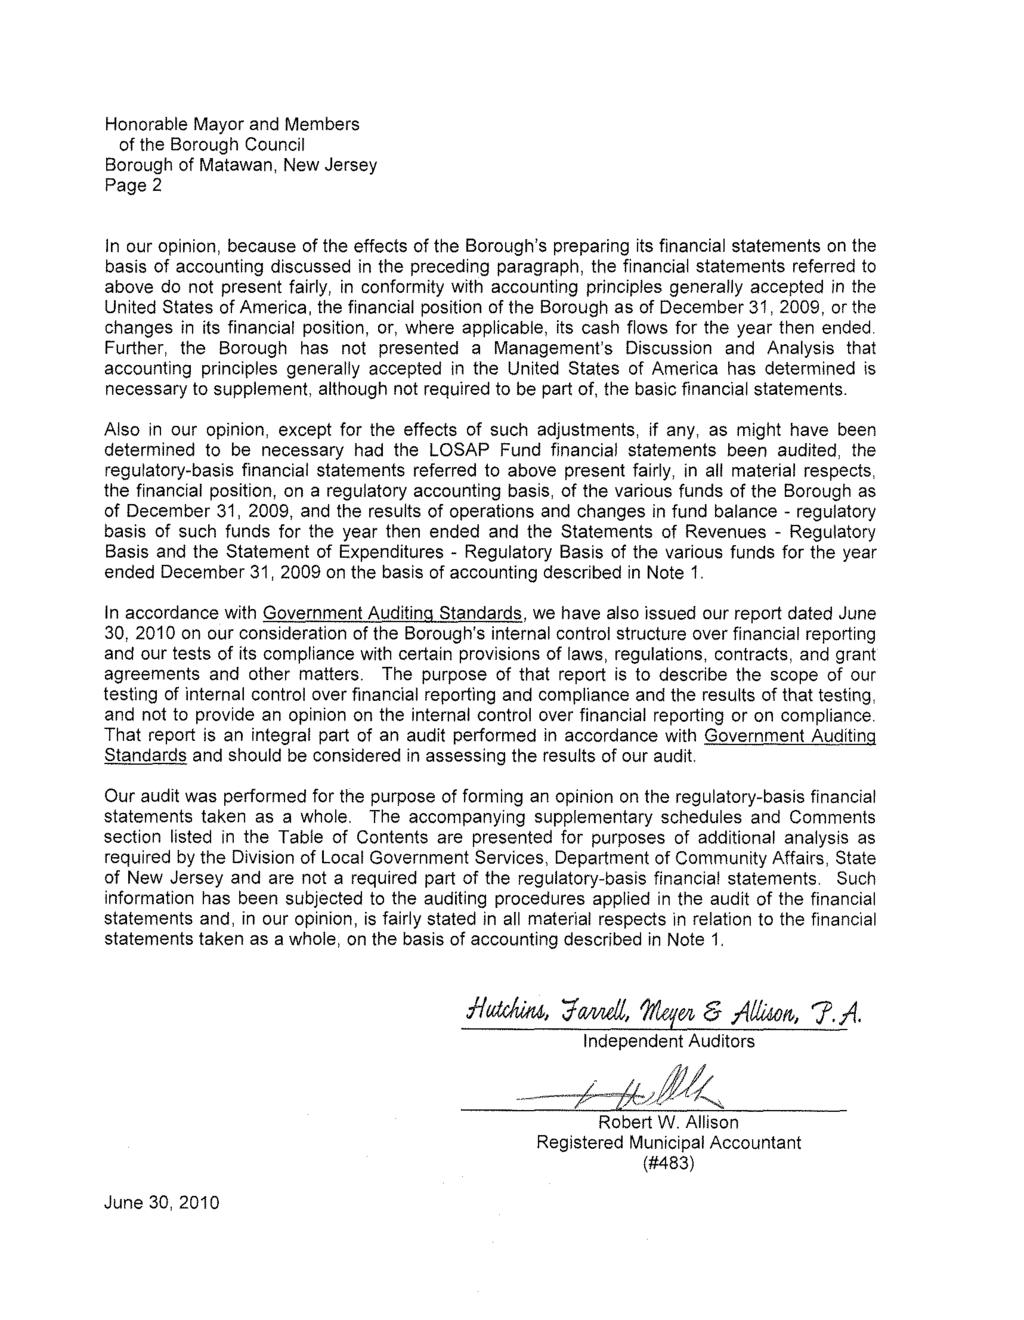 Honorable Mayor and Members of the Borough Council Borough of Matawan, New Jersey Page 2 In our opinion, because of the effects of the Borough's preparing its financial statements on the basis of